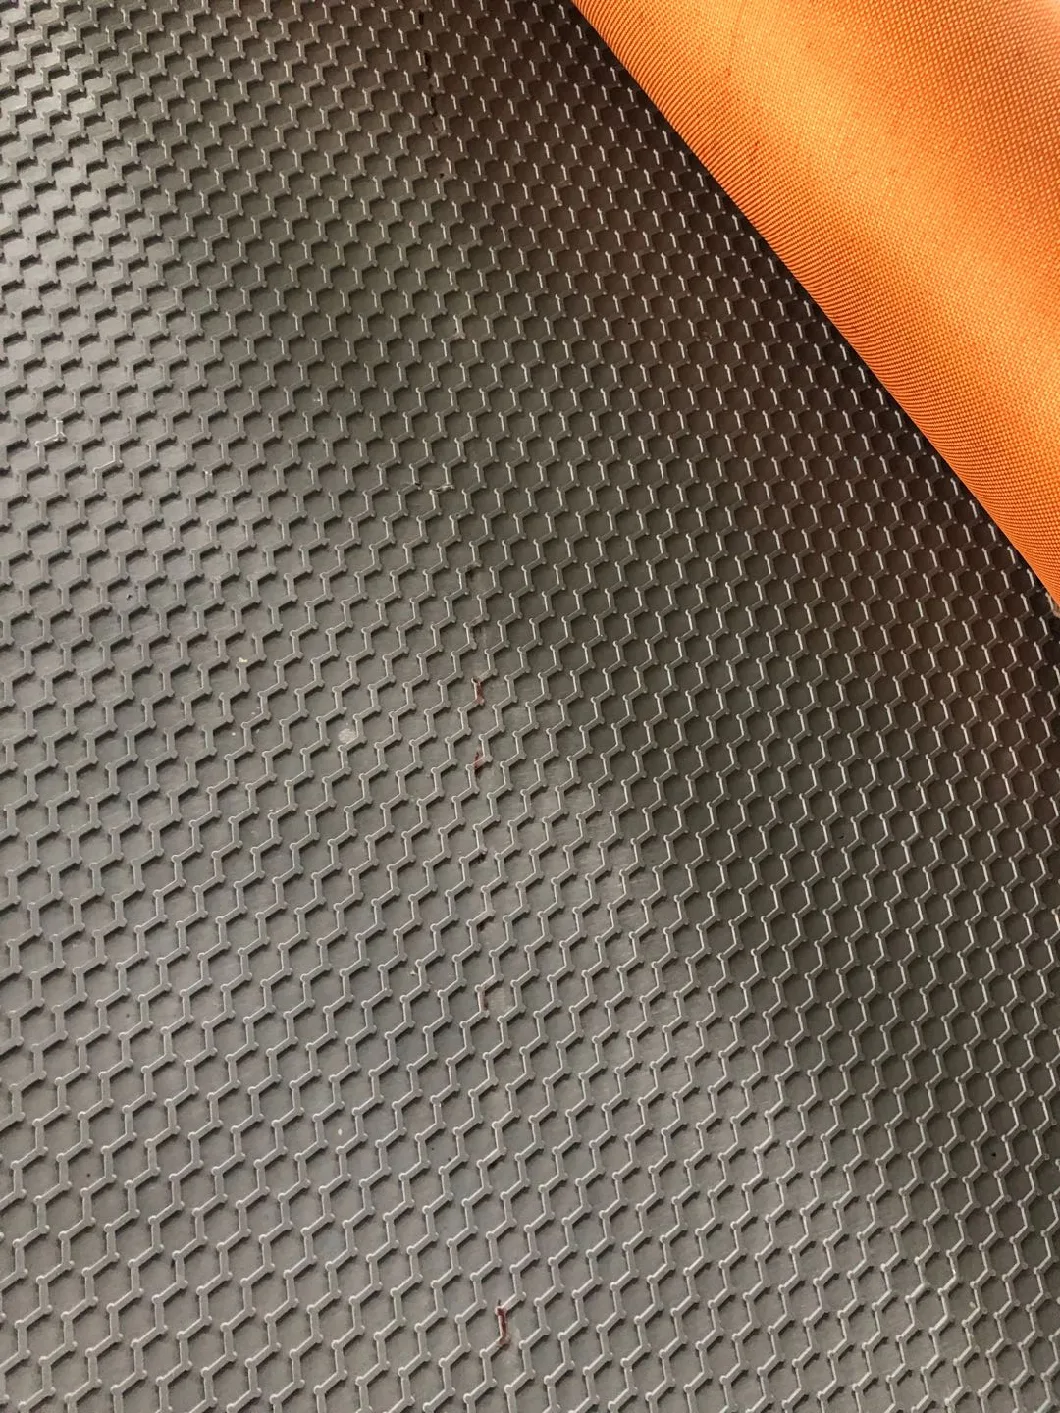 Anti-Slip Honey Comb Rubber Mat with Backside High Quality Ep Fabric Coated.